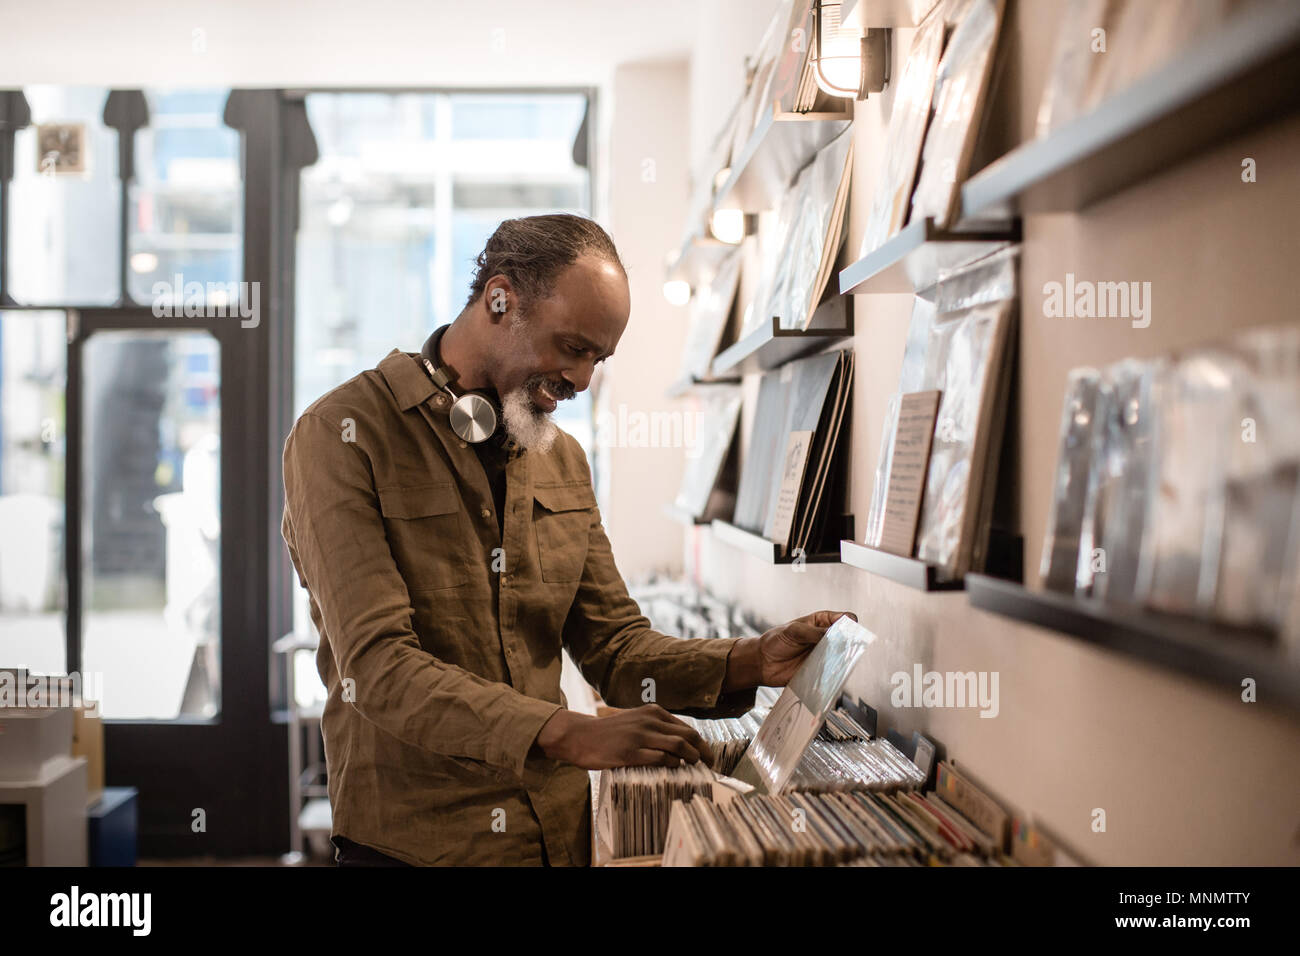 Senior Male looking for records in a store Stock Photo